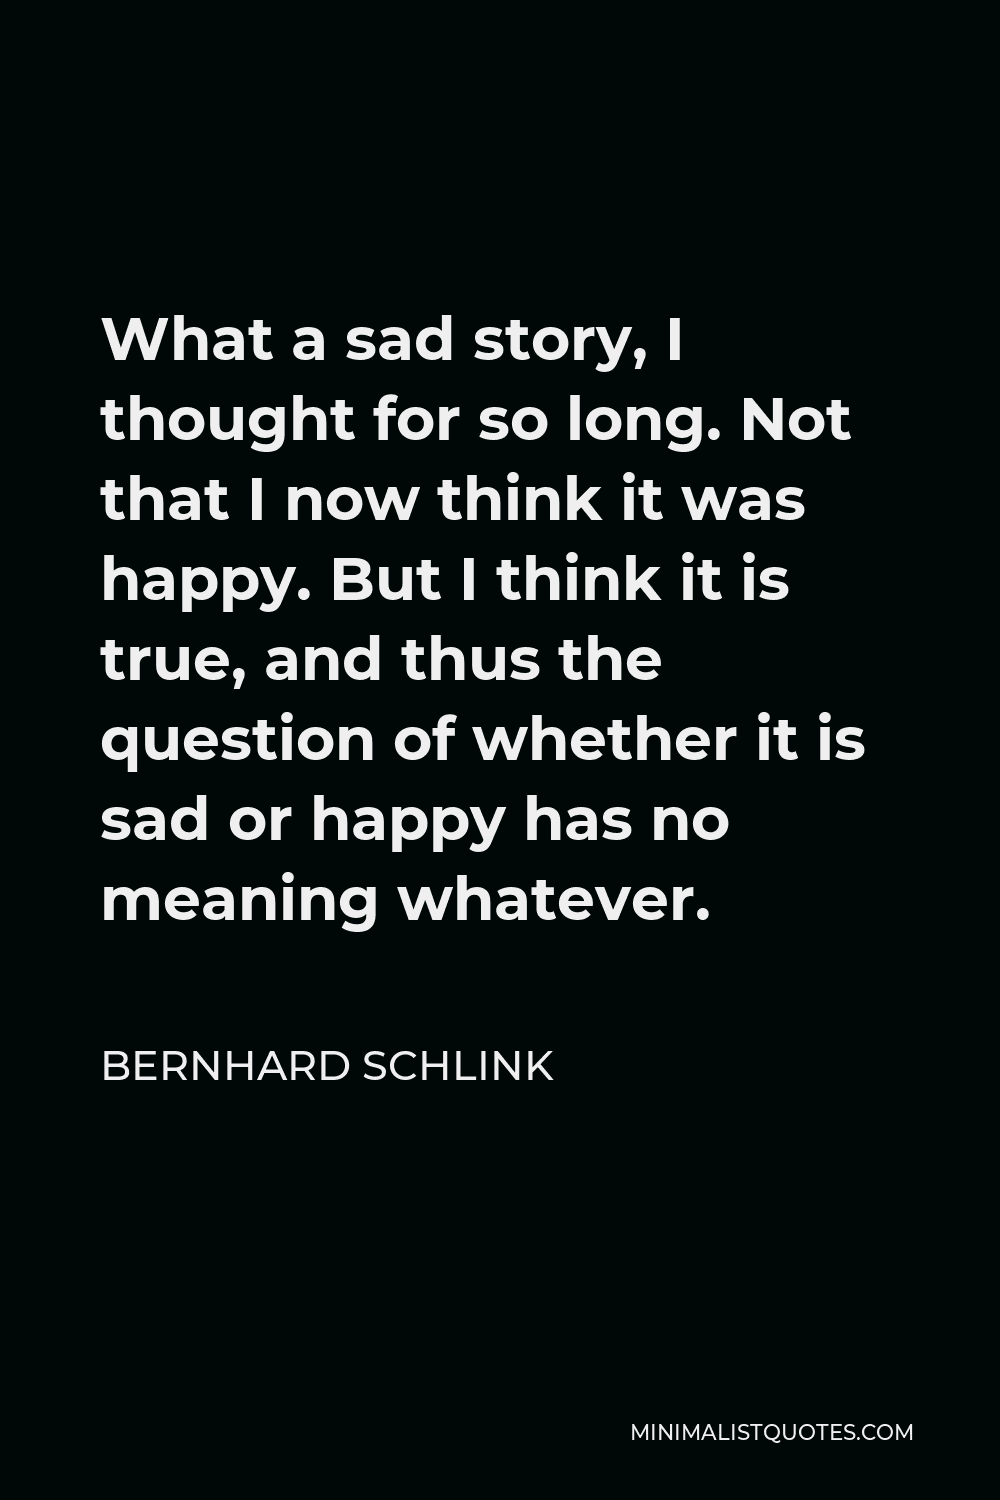 Bernhard Schlink Quote - What a sad story, I thought for so long. Not that I now think it was happy. But I think it is true, and thus the question of whether it is sad or happy has no meaning whatever.